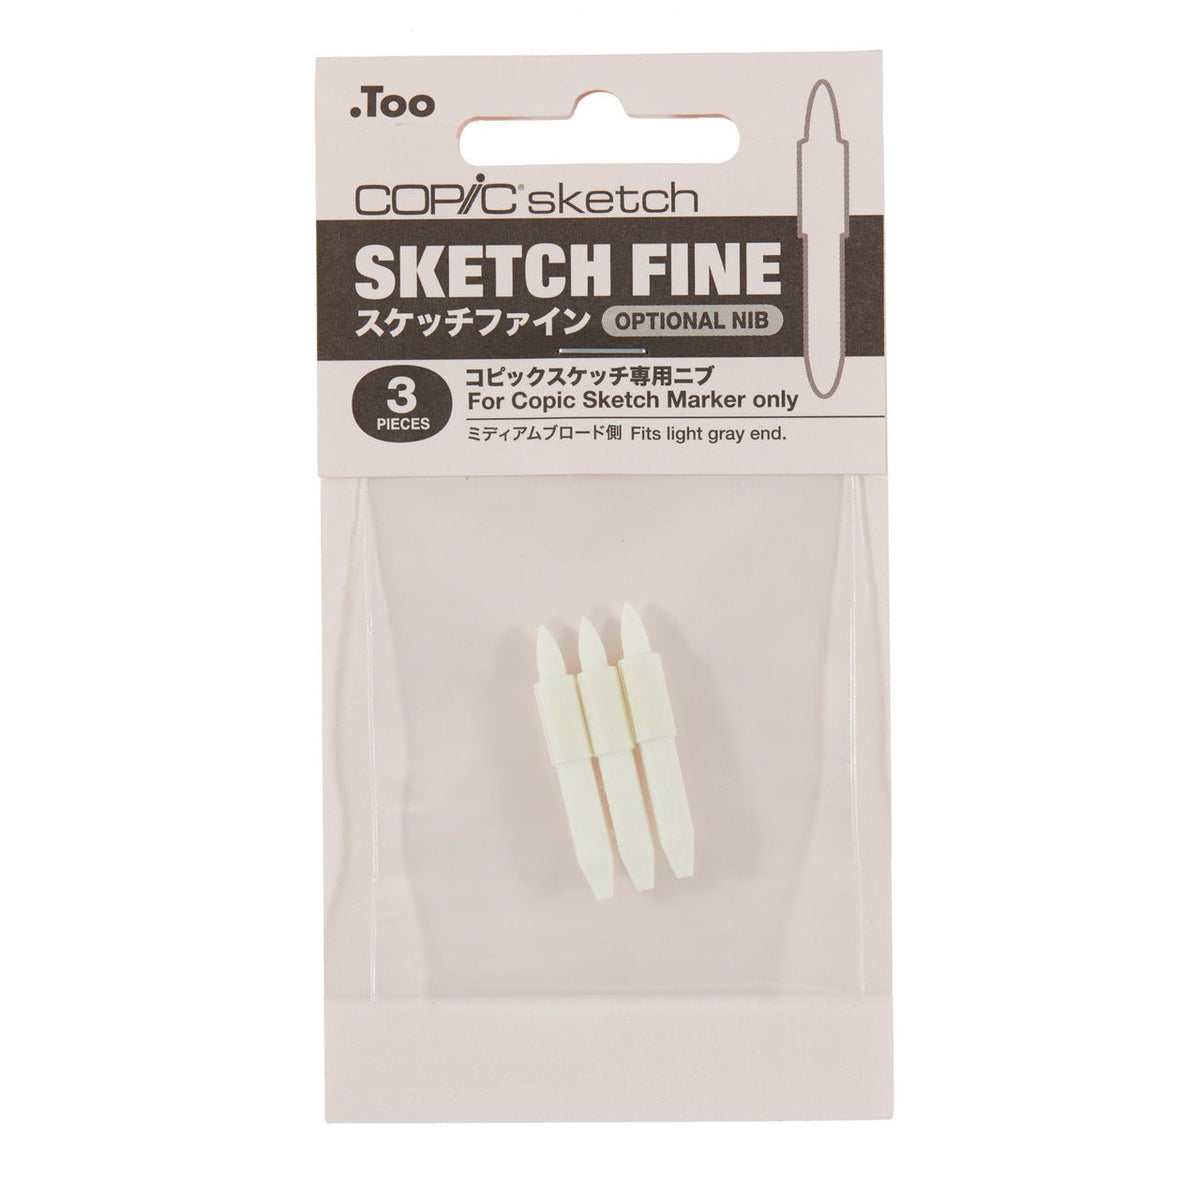 Copic Fine Nib (for Sketch Marker) Pack of 3 - merriartist.com